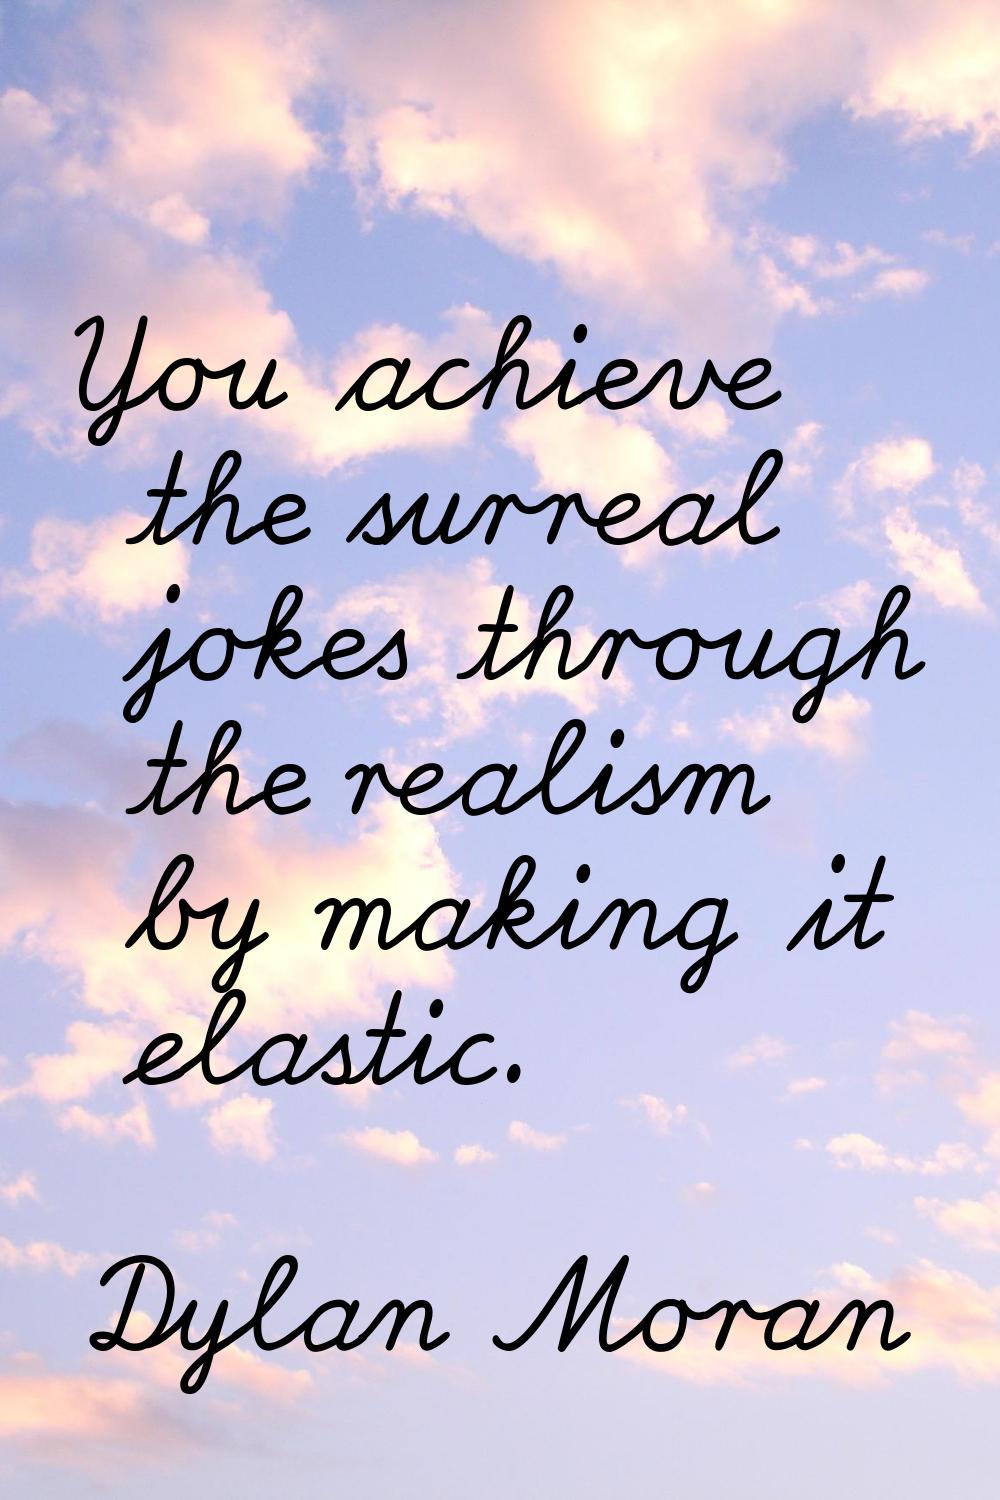 You achieve the surreal jokes through the realism by making it elastic.